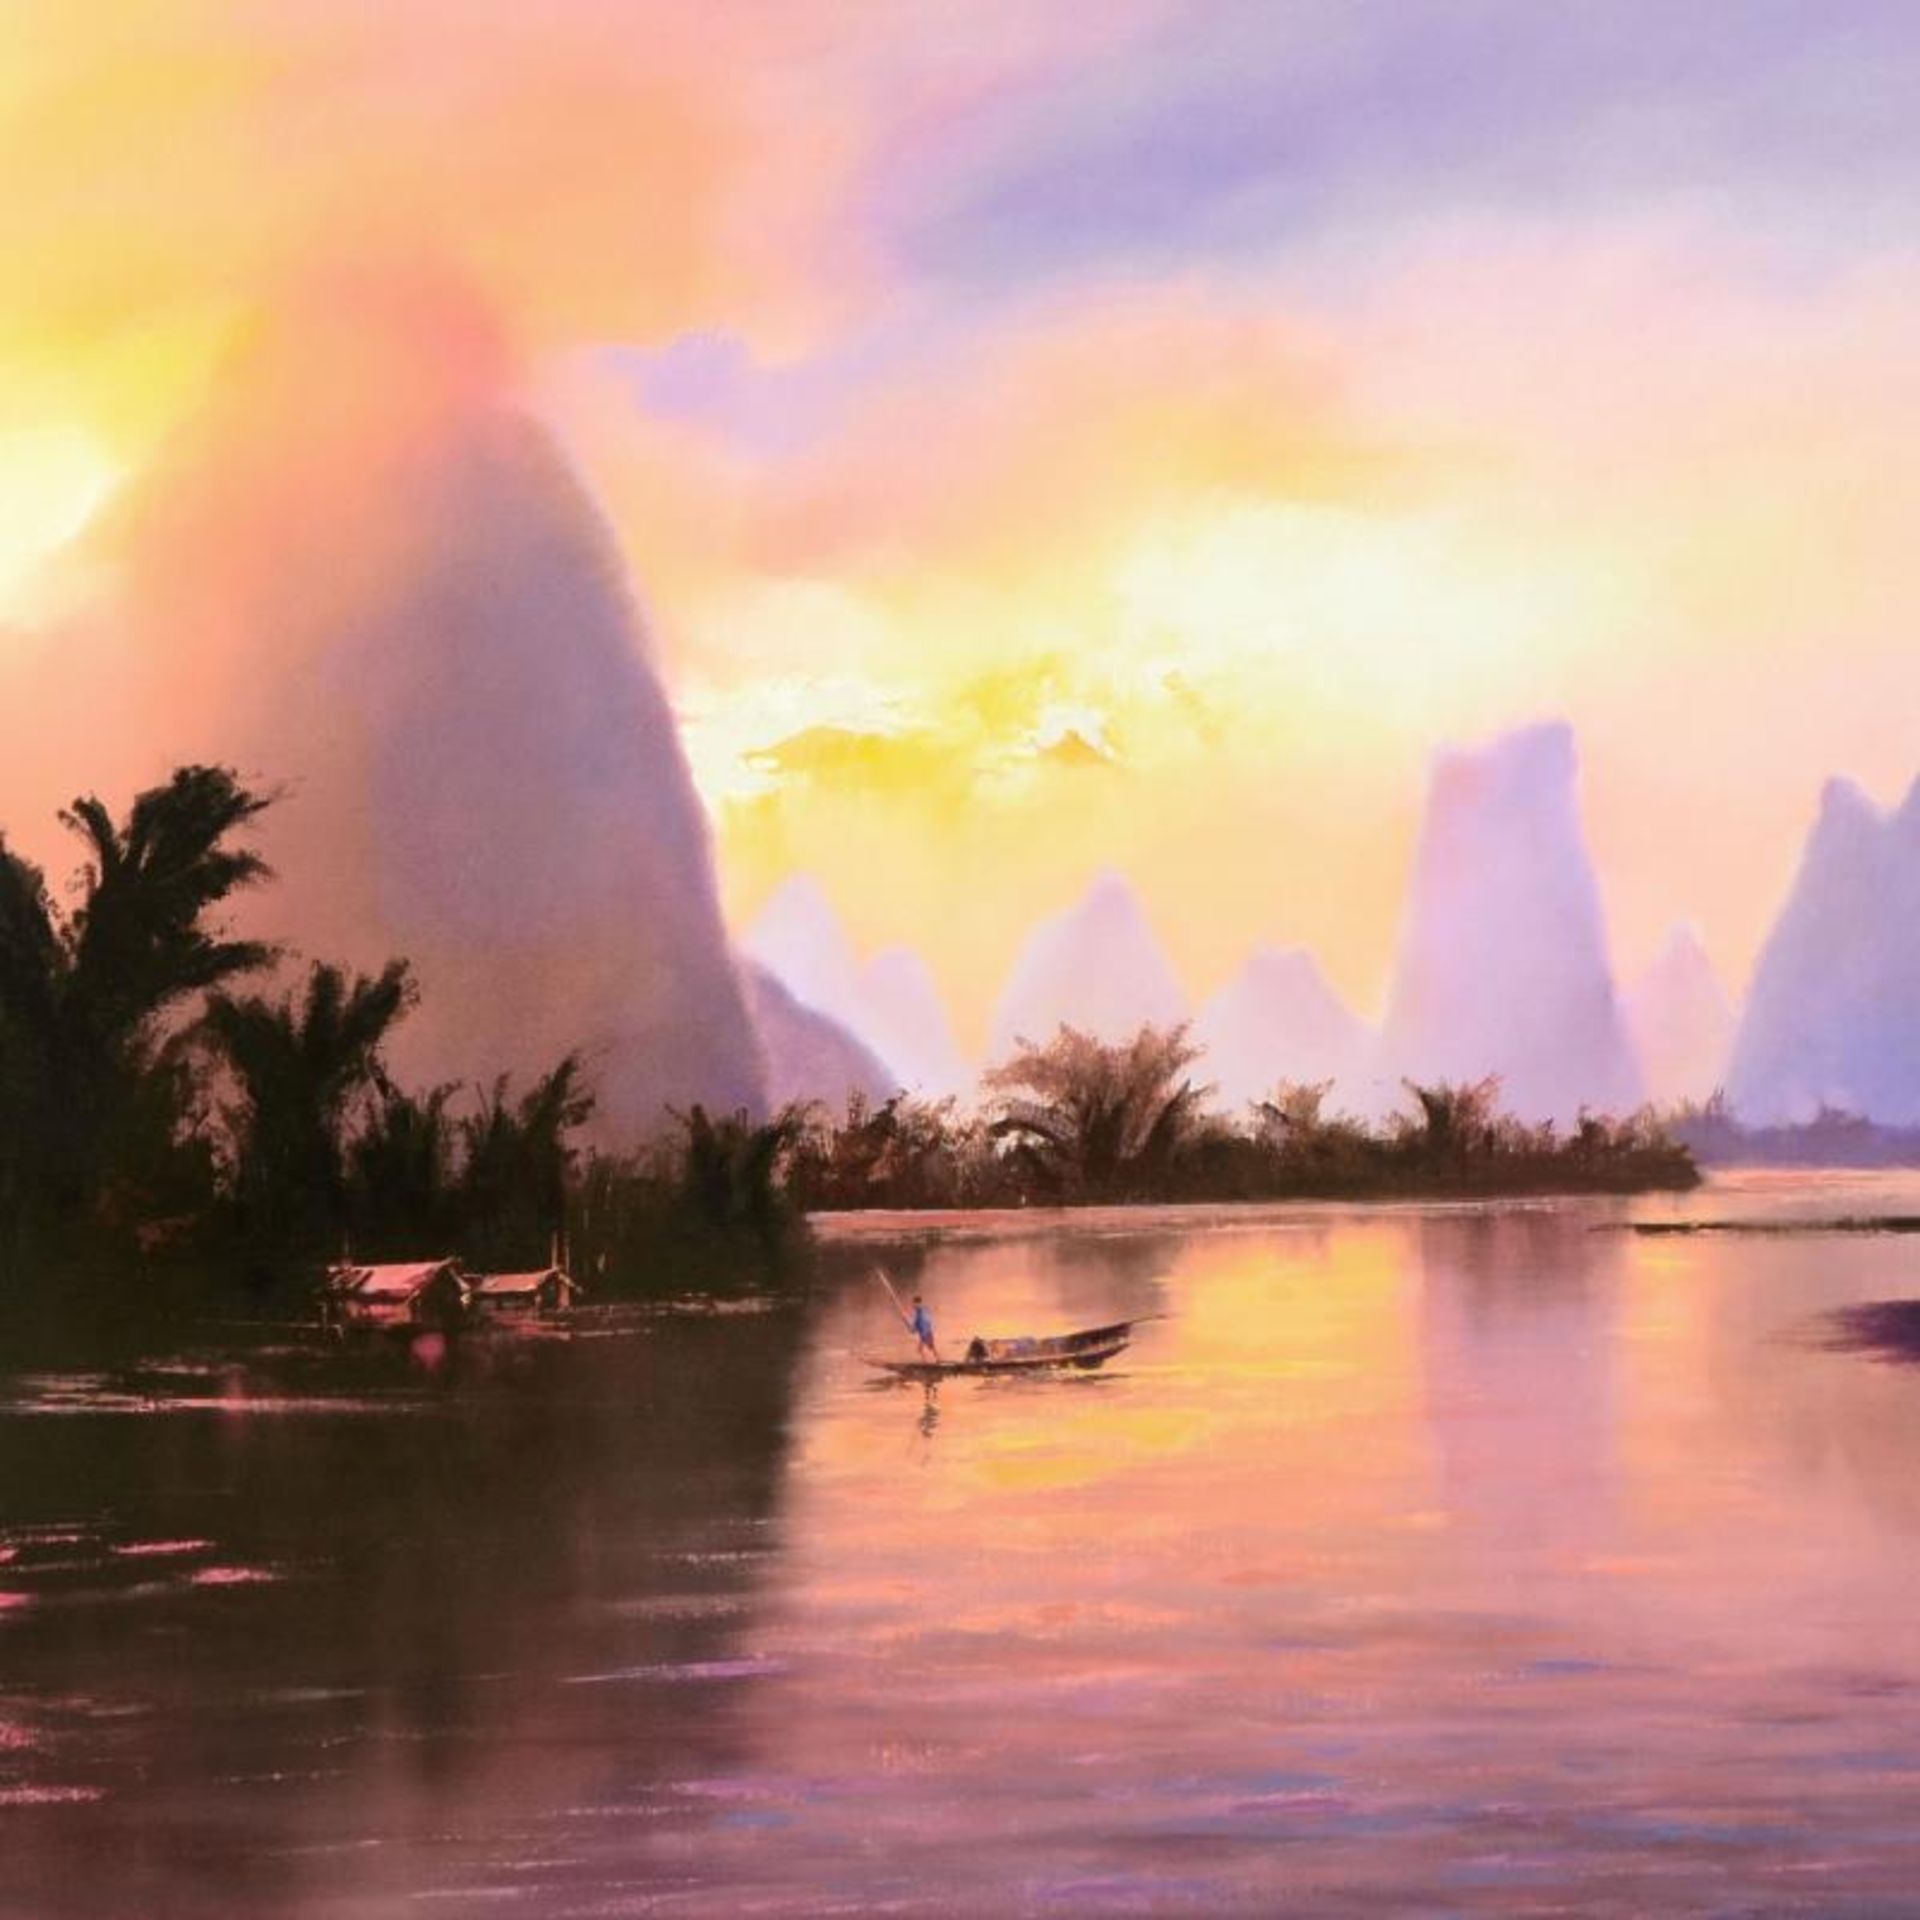 Tropic Dawn by Leung, H. - Image 2 of 2